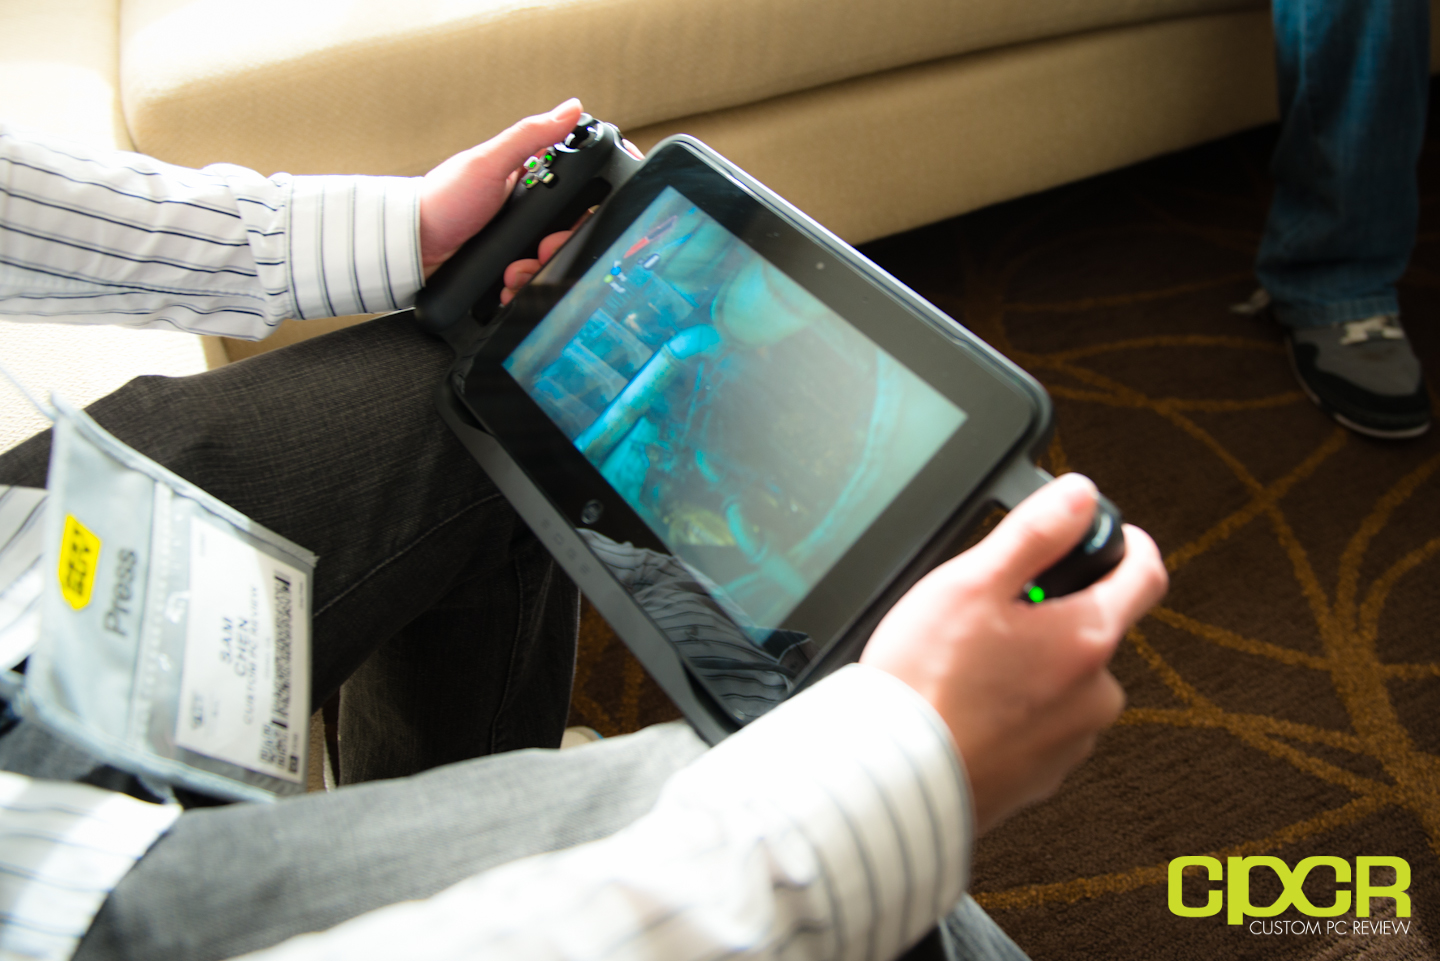 CES 2013: Razer Edge Gaming Tablet Hands On, First Impressions